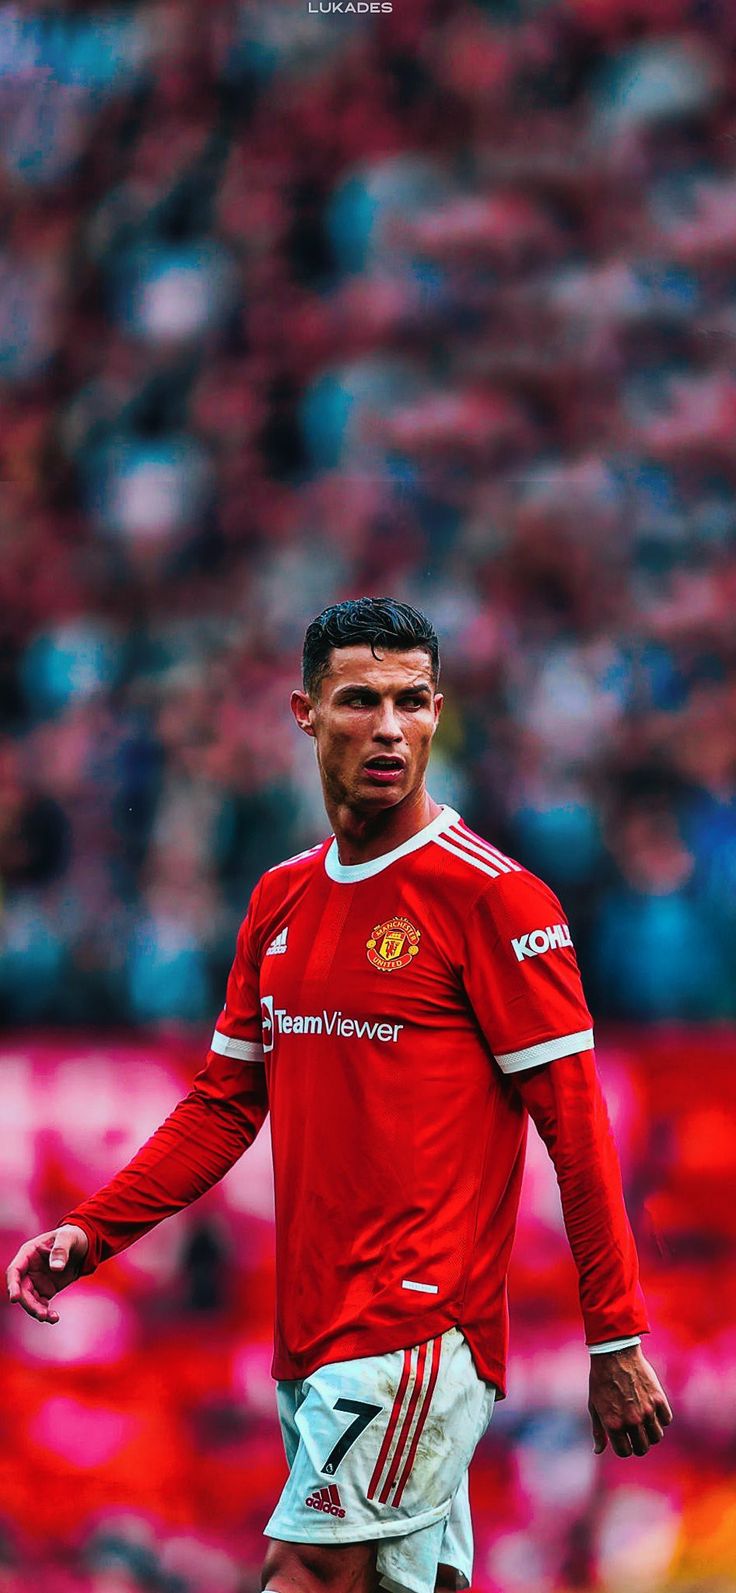 Cristiano Ronaldo Manchester United Wallpapers  Top 25 Best CR7 Manchester  United Backgrounds Download